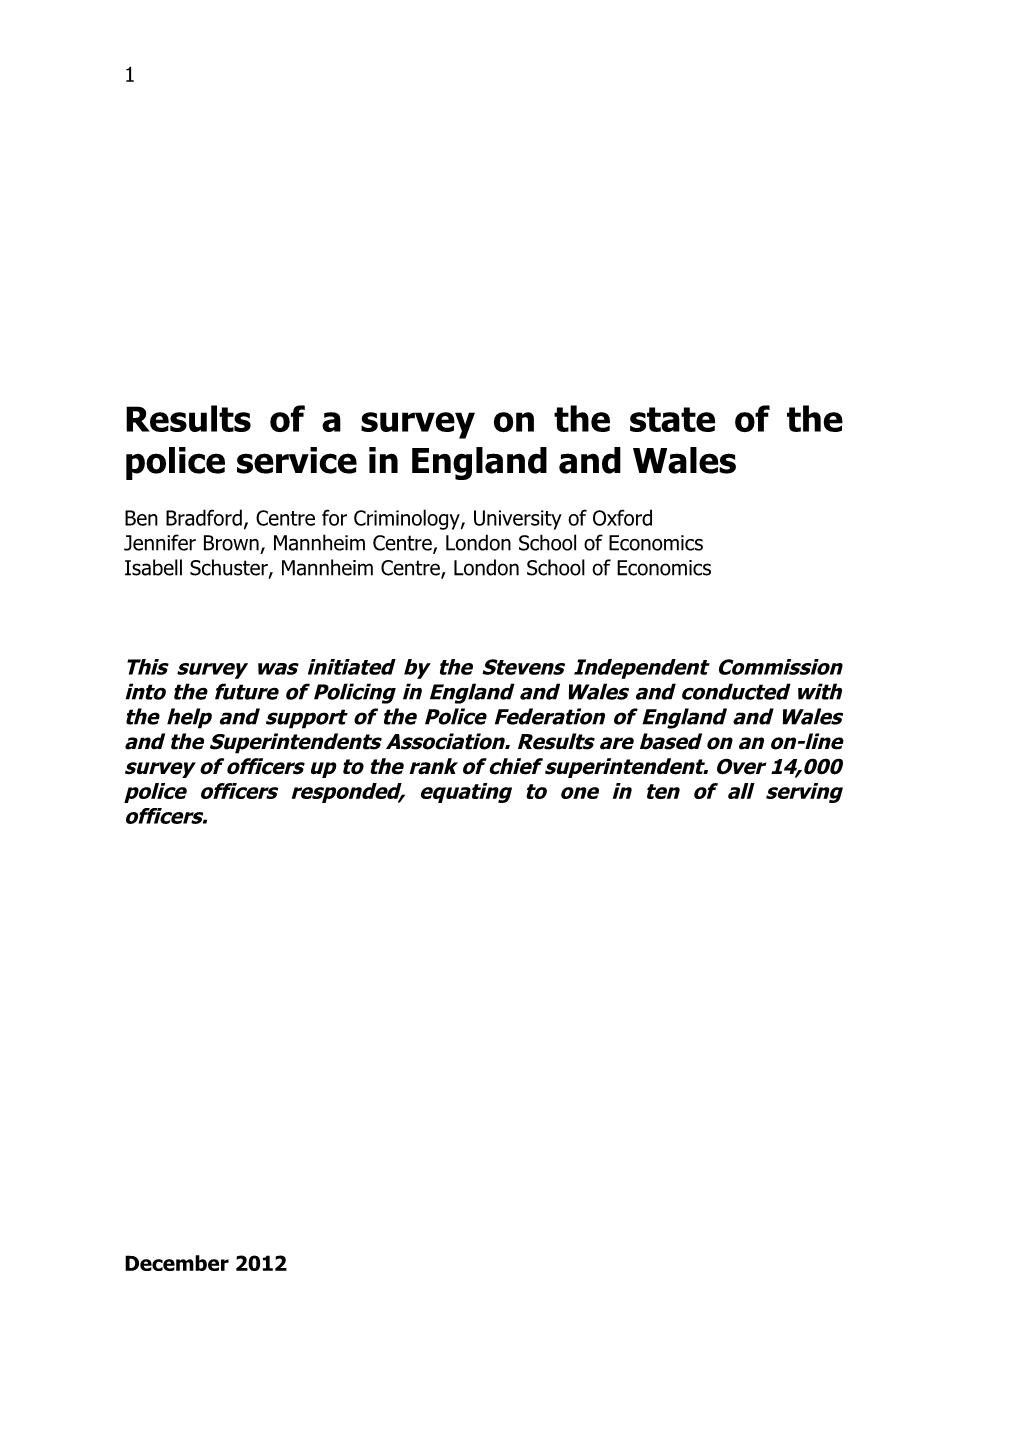 Results Of A Survey On The State Of The Police Service In England And Wales